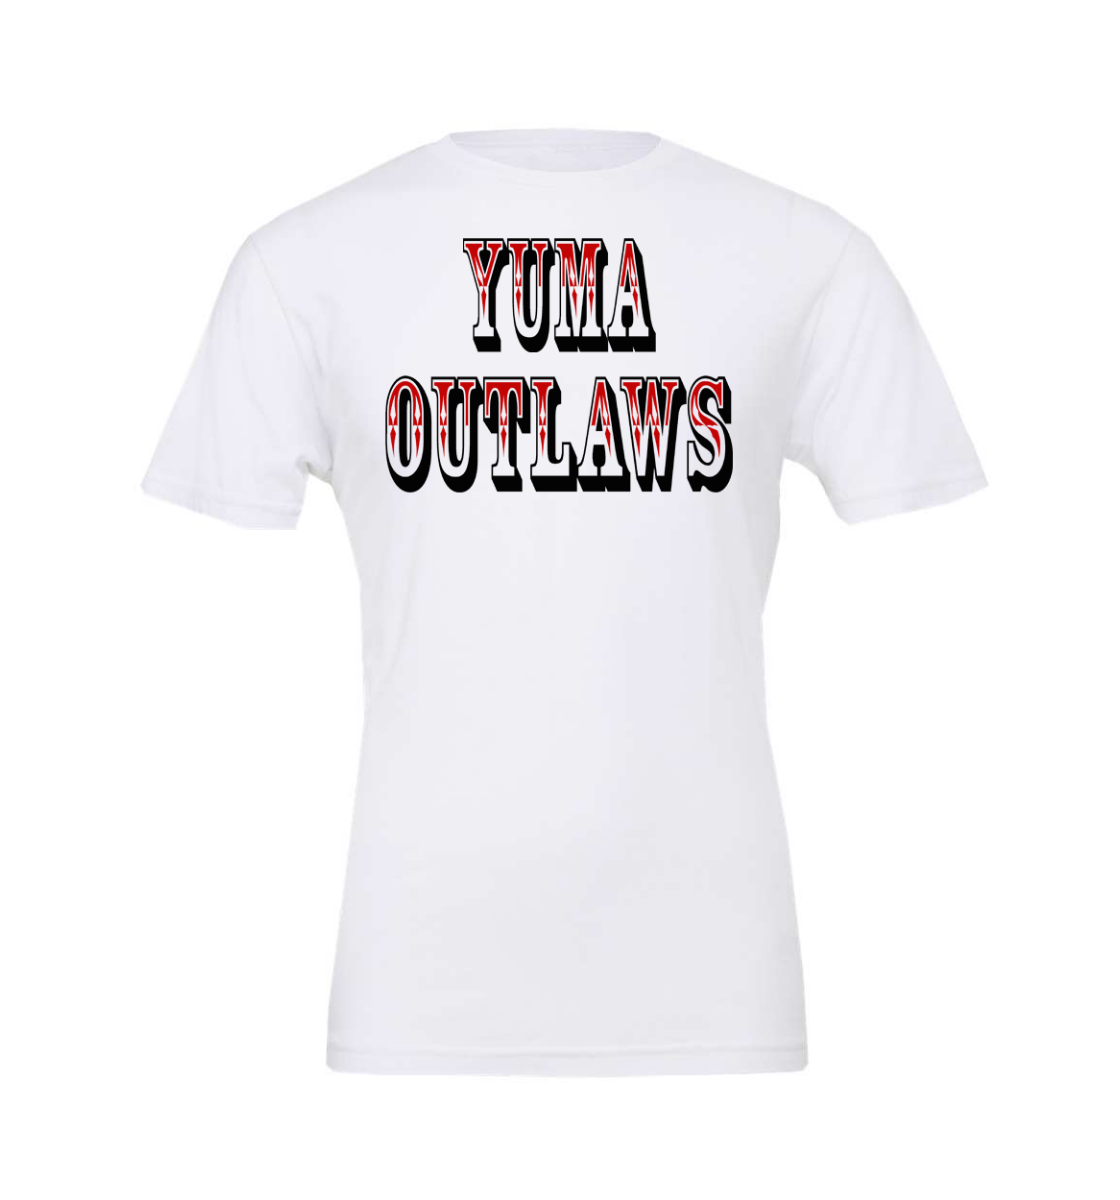 yuma outlaws youth t-shirt: for young outlaws fans only!